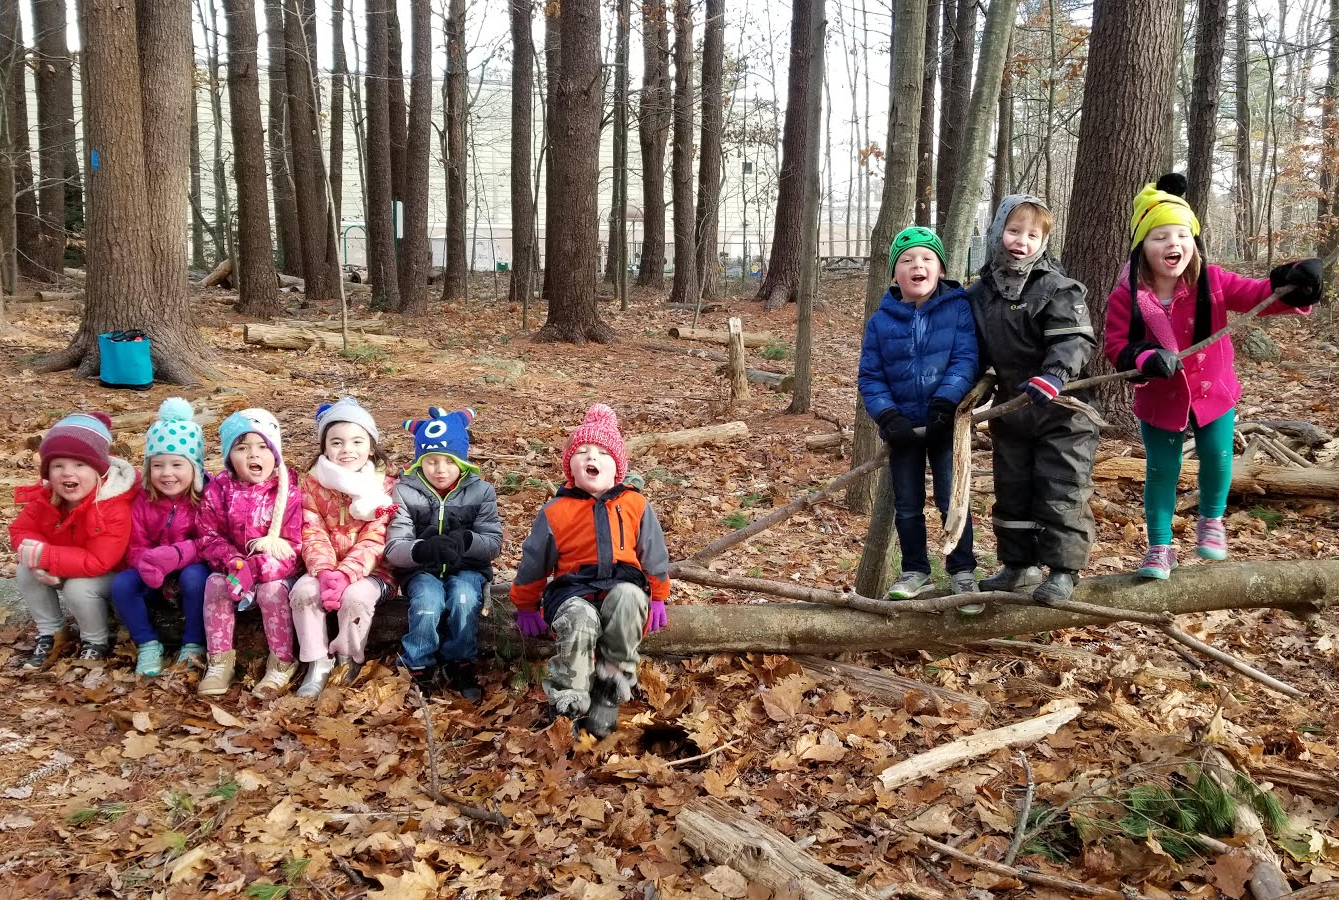 Kids outside in a wooded area